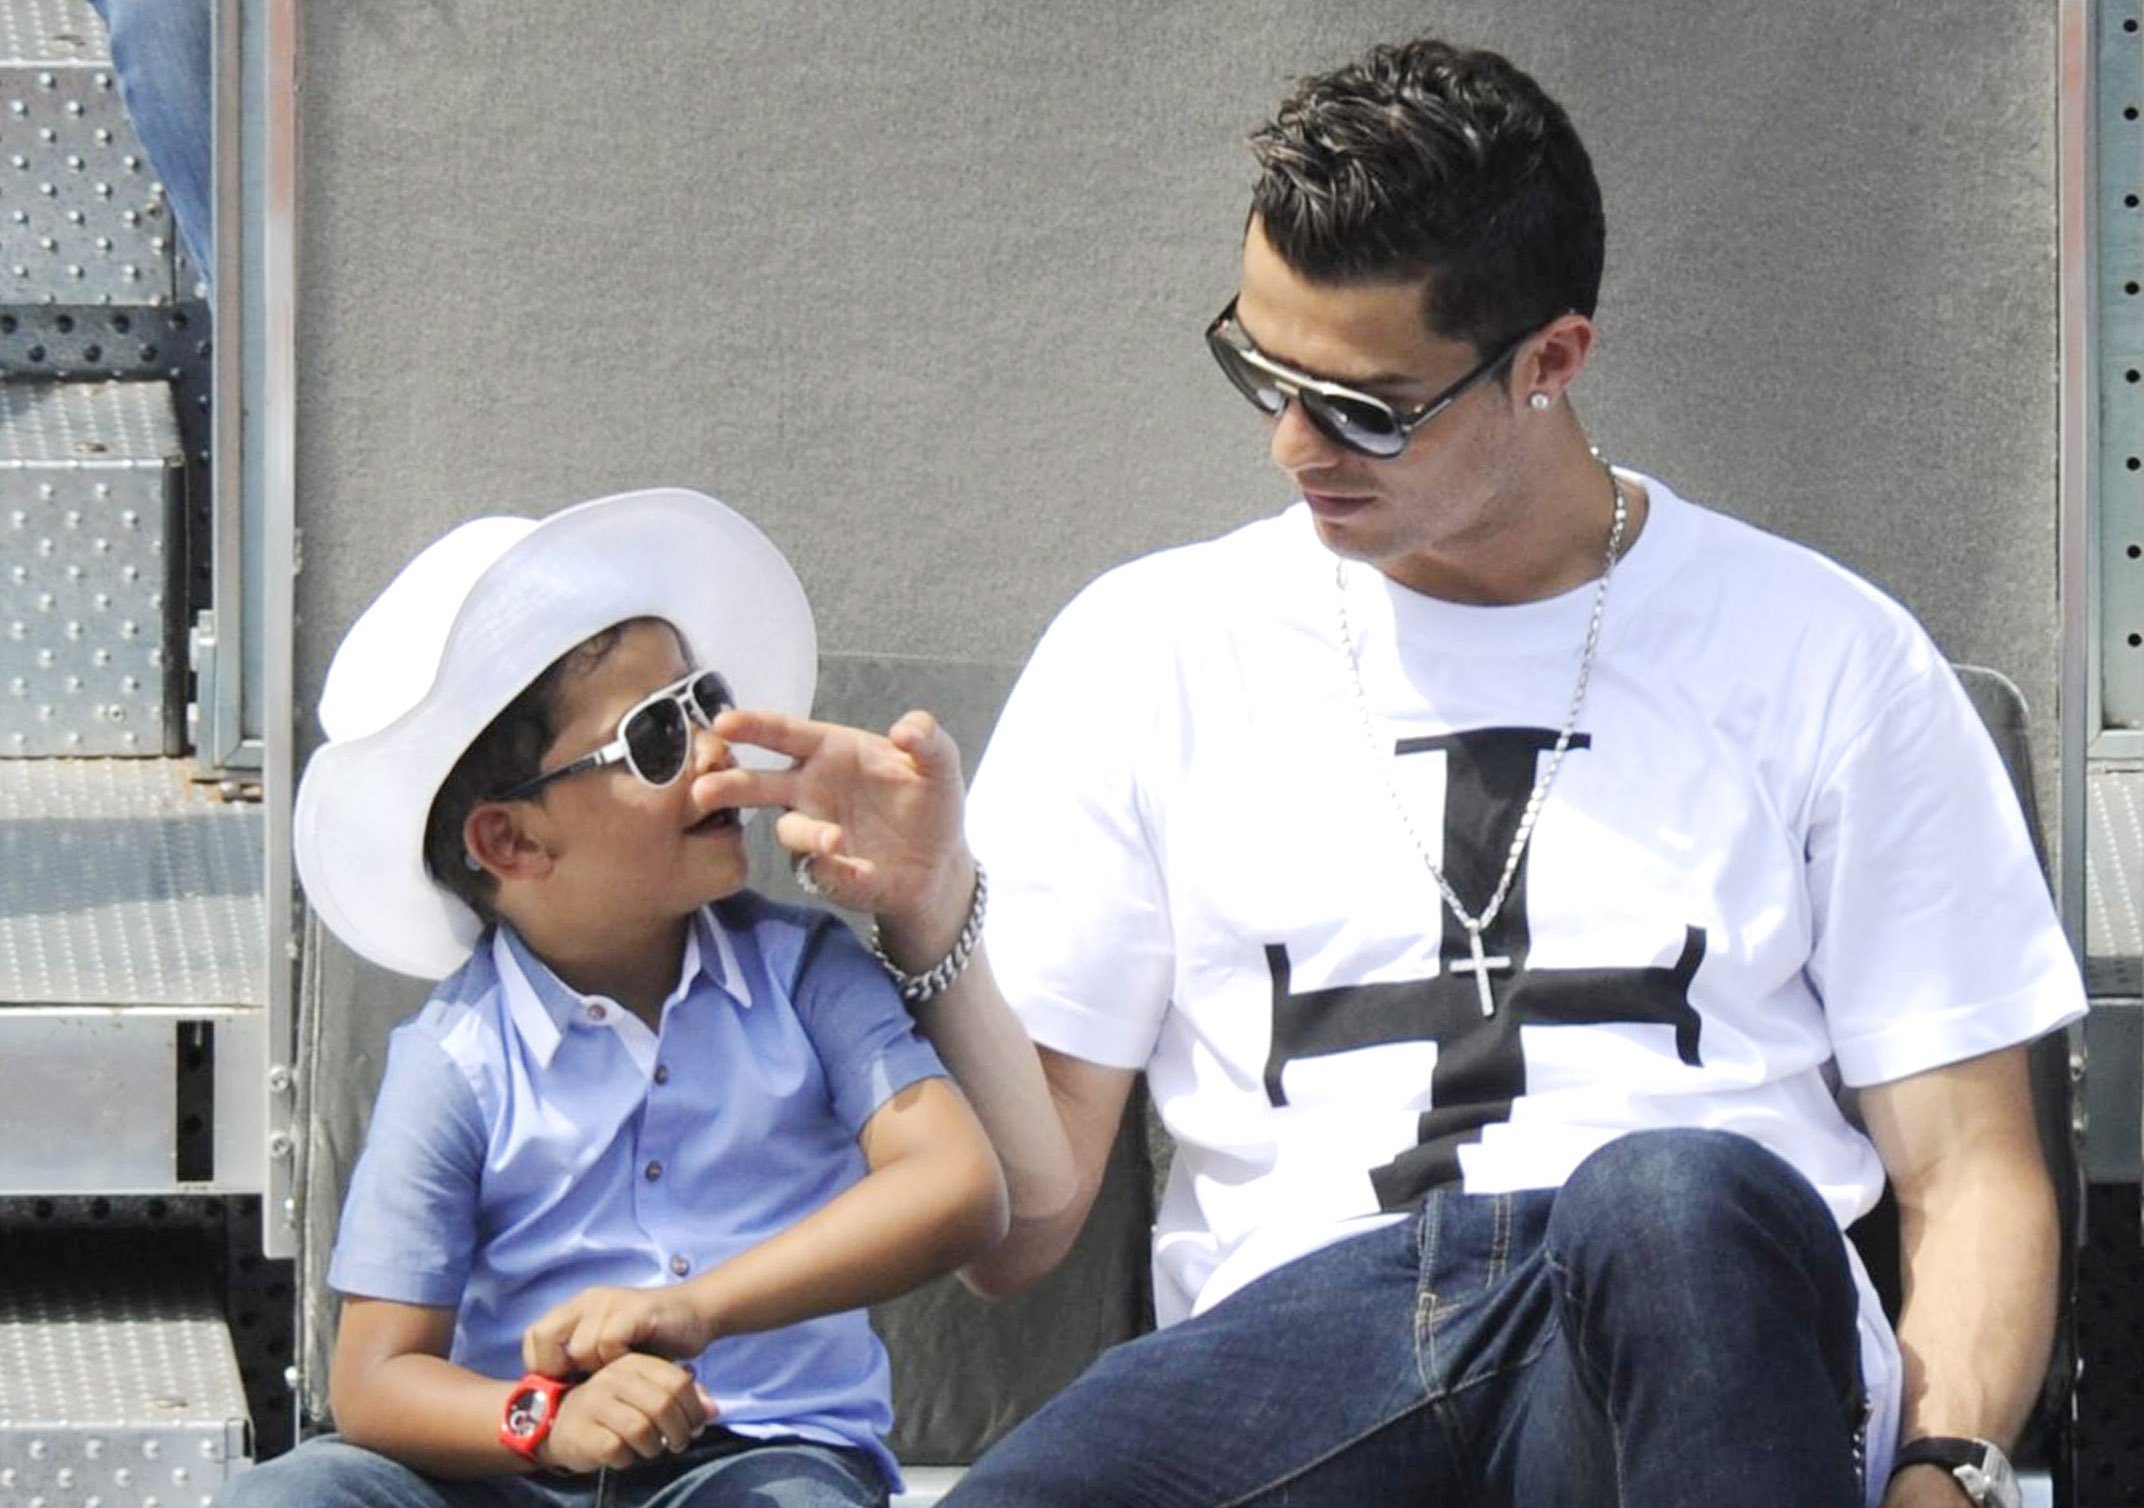 Cristiano Ronaldo and Cristiano Ronaldo Jr. at the Mutua Madrid Open tennis tournament on May 8, 2014 | Source: Getty Images